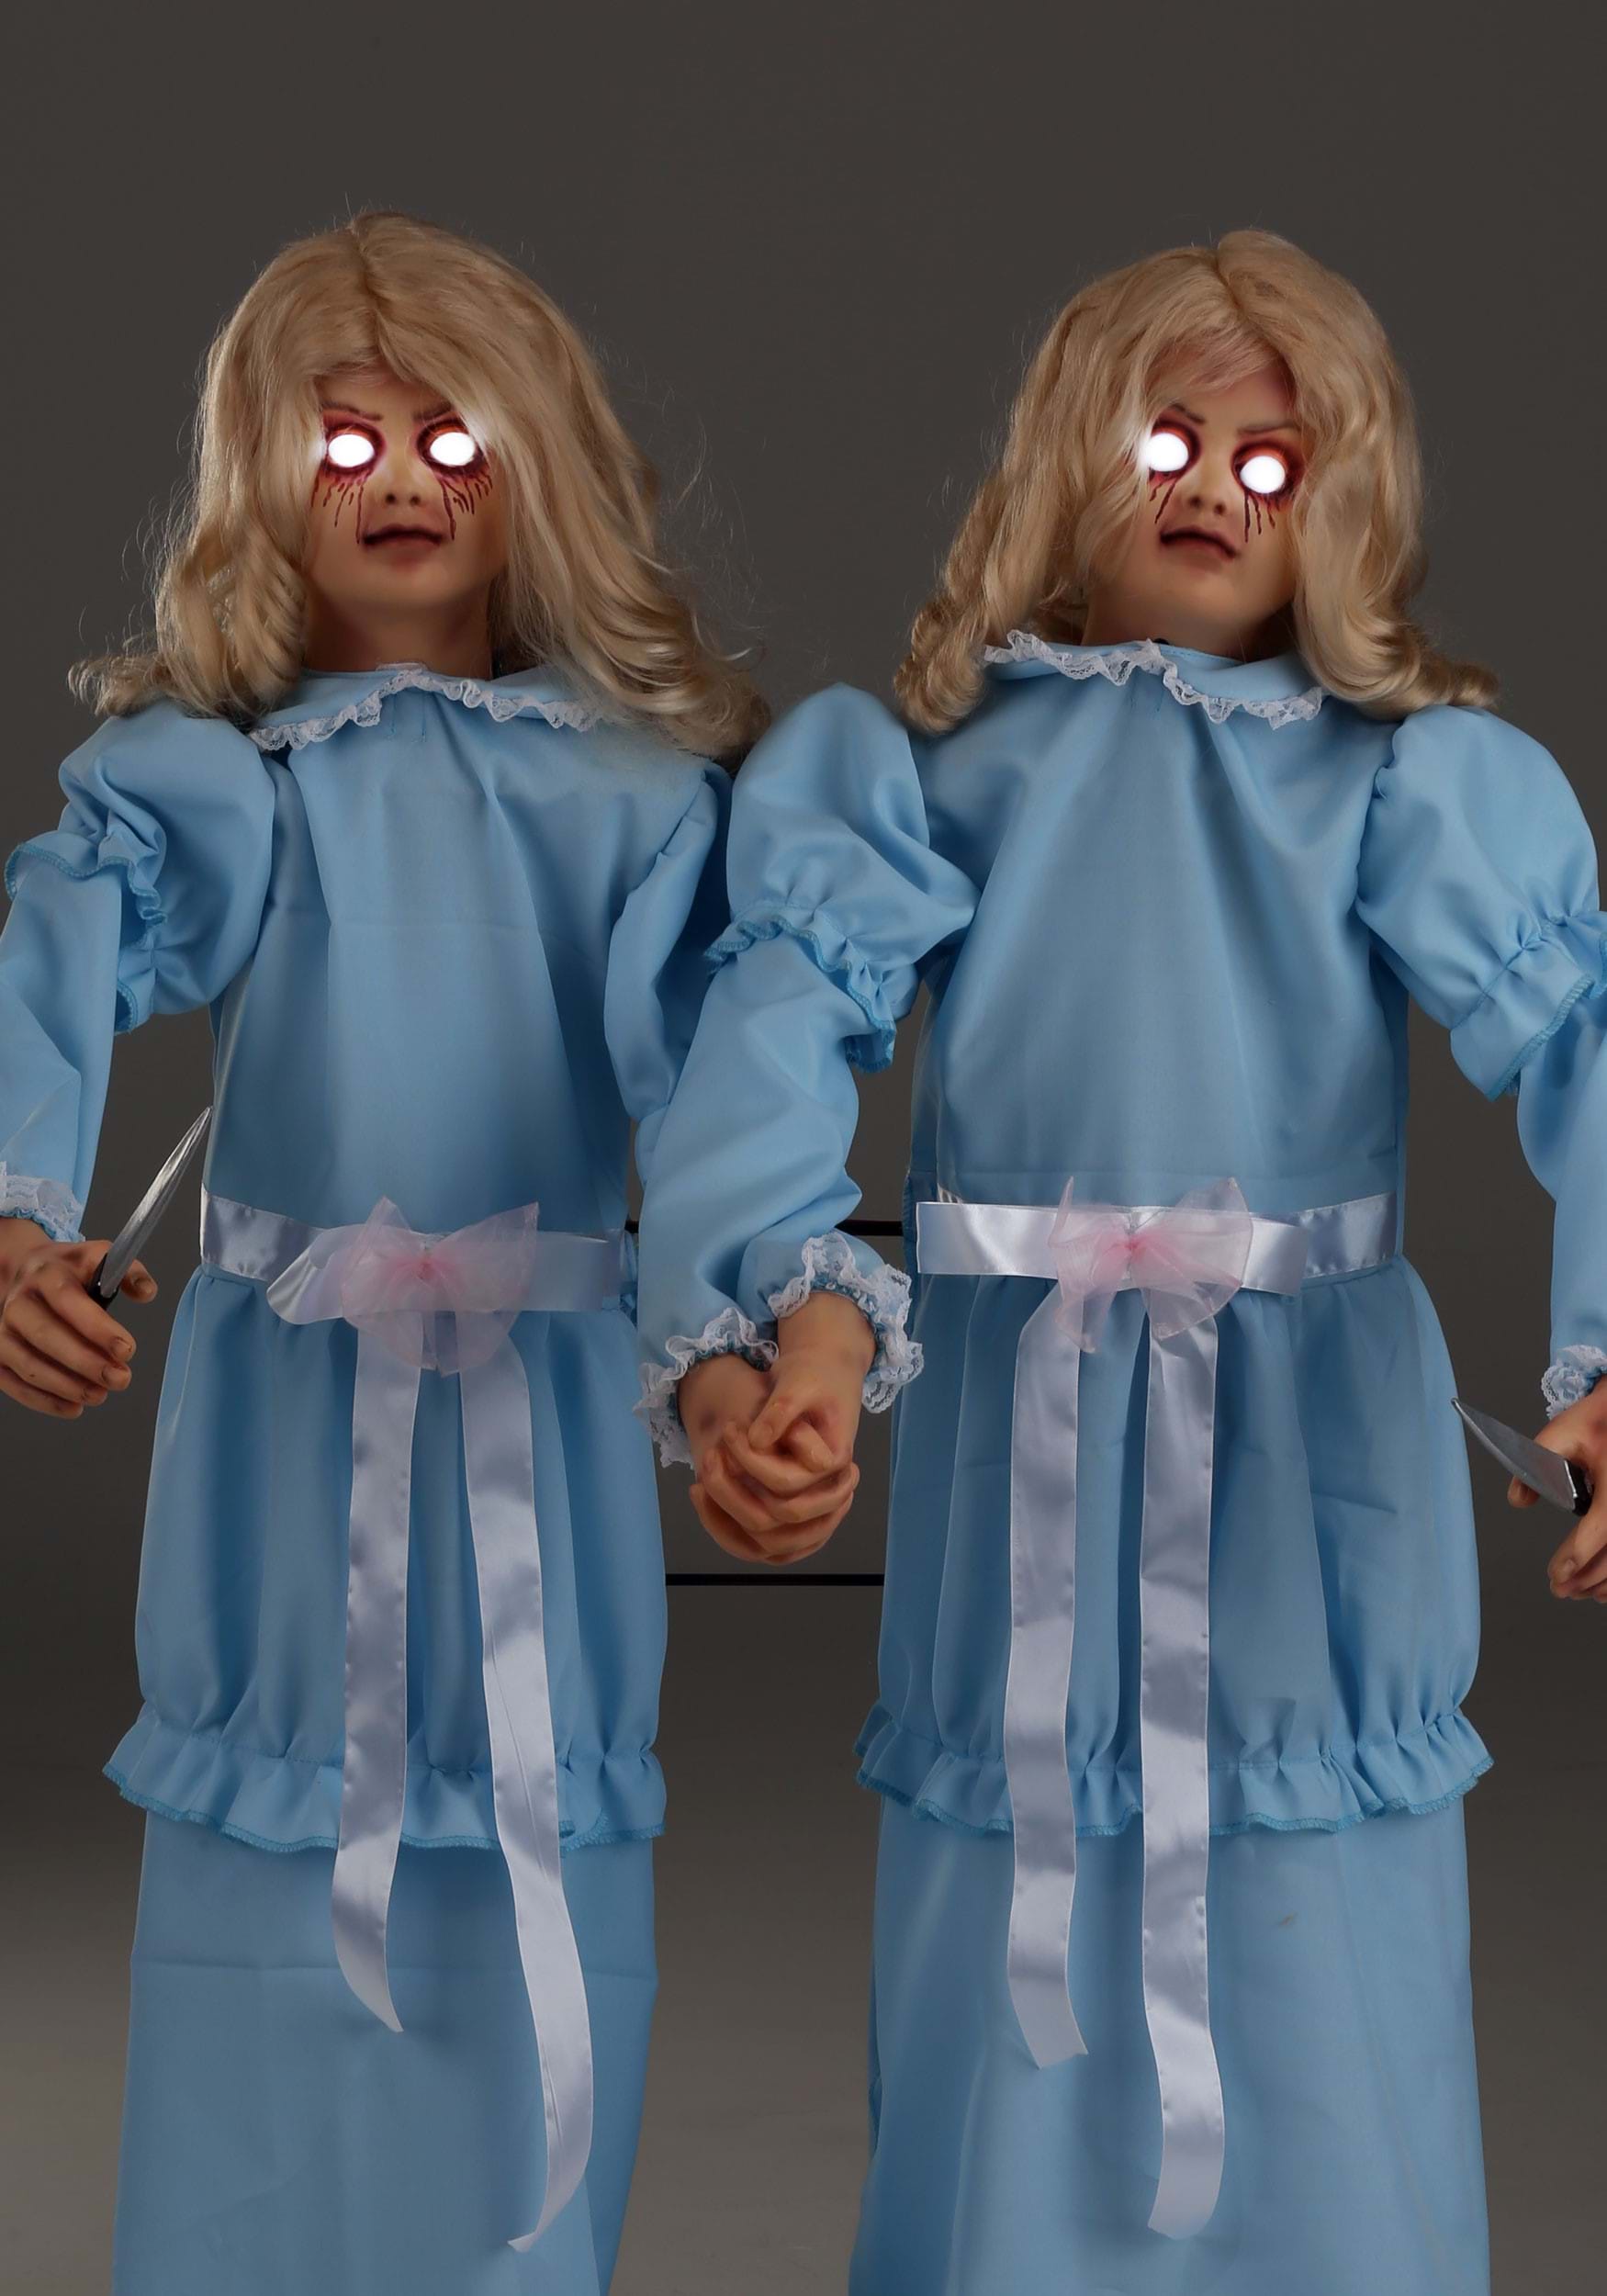 show me zombies 2 dolls Cheap Sell - OFF 77%